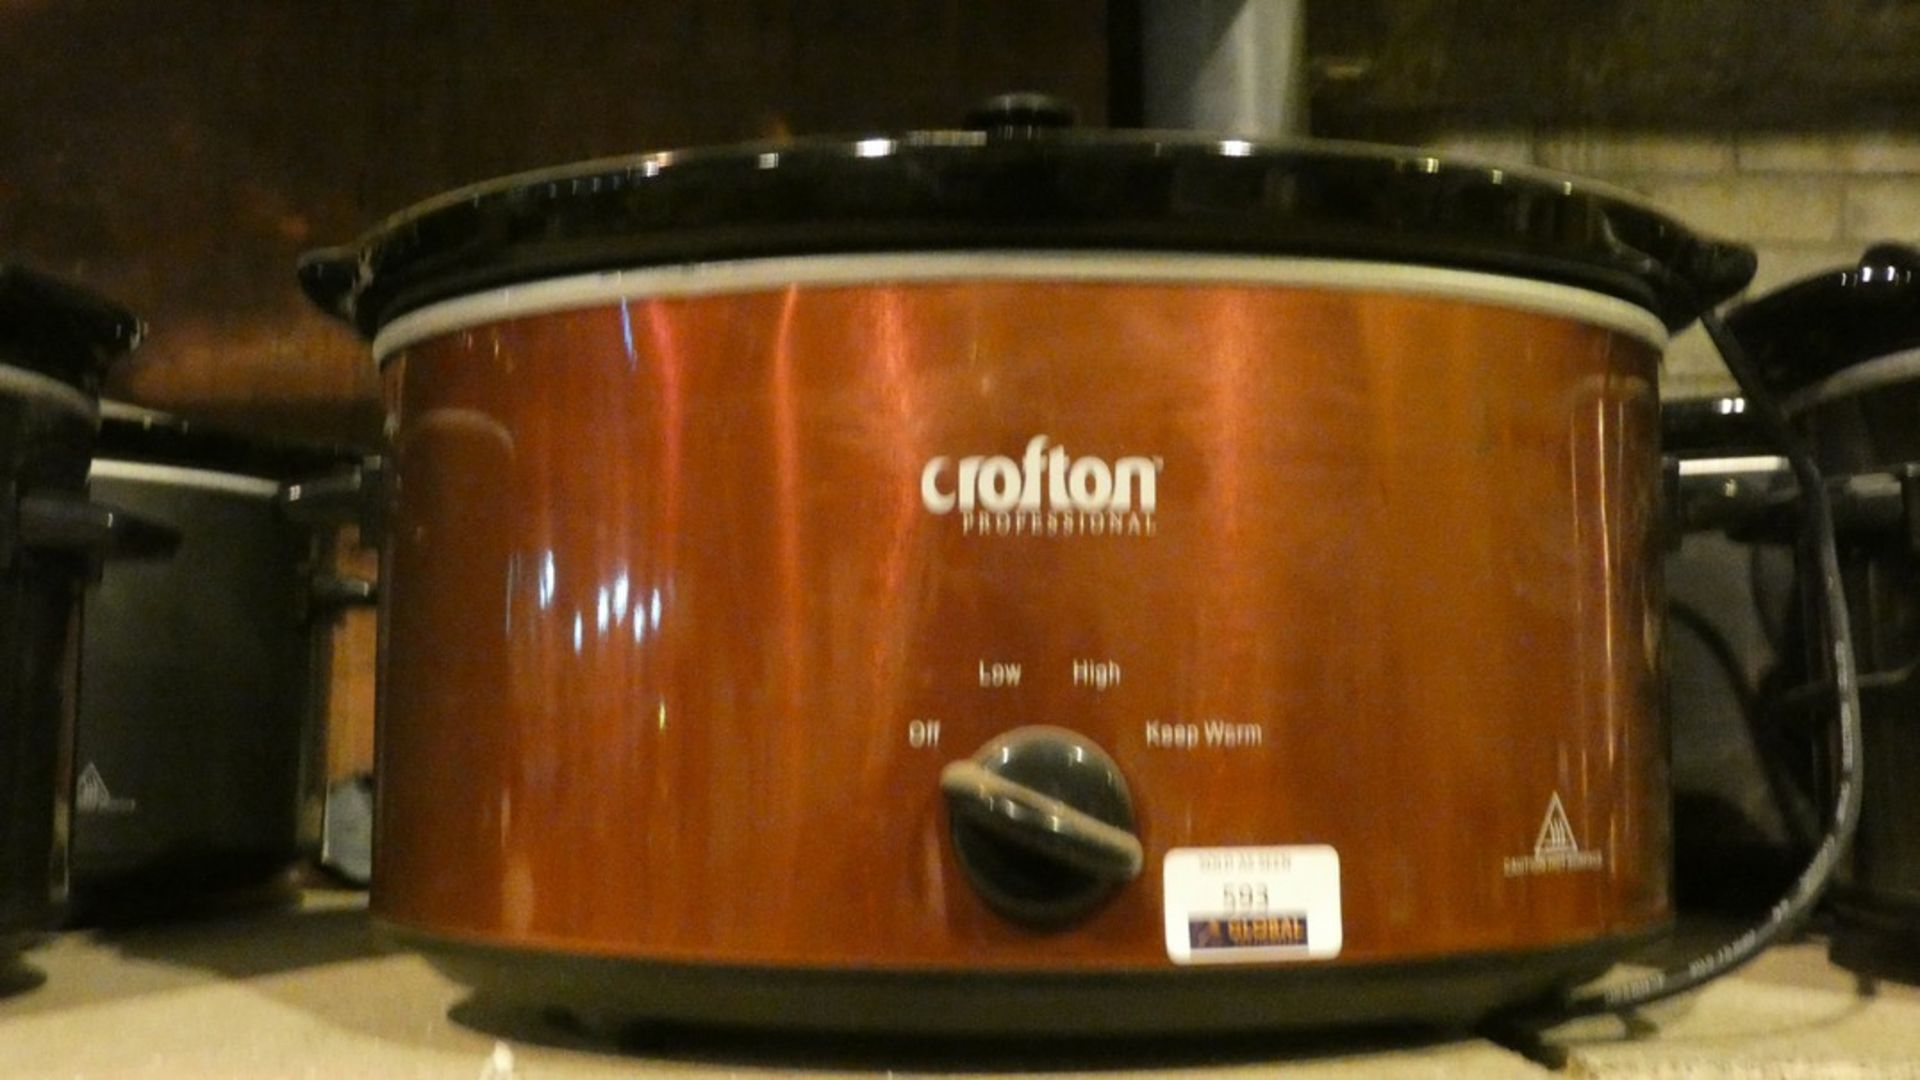 Lot to Contain 2 Krofton Professional Electric Slow Cookers RRP £35 Each